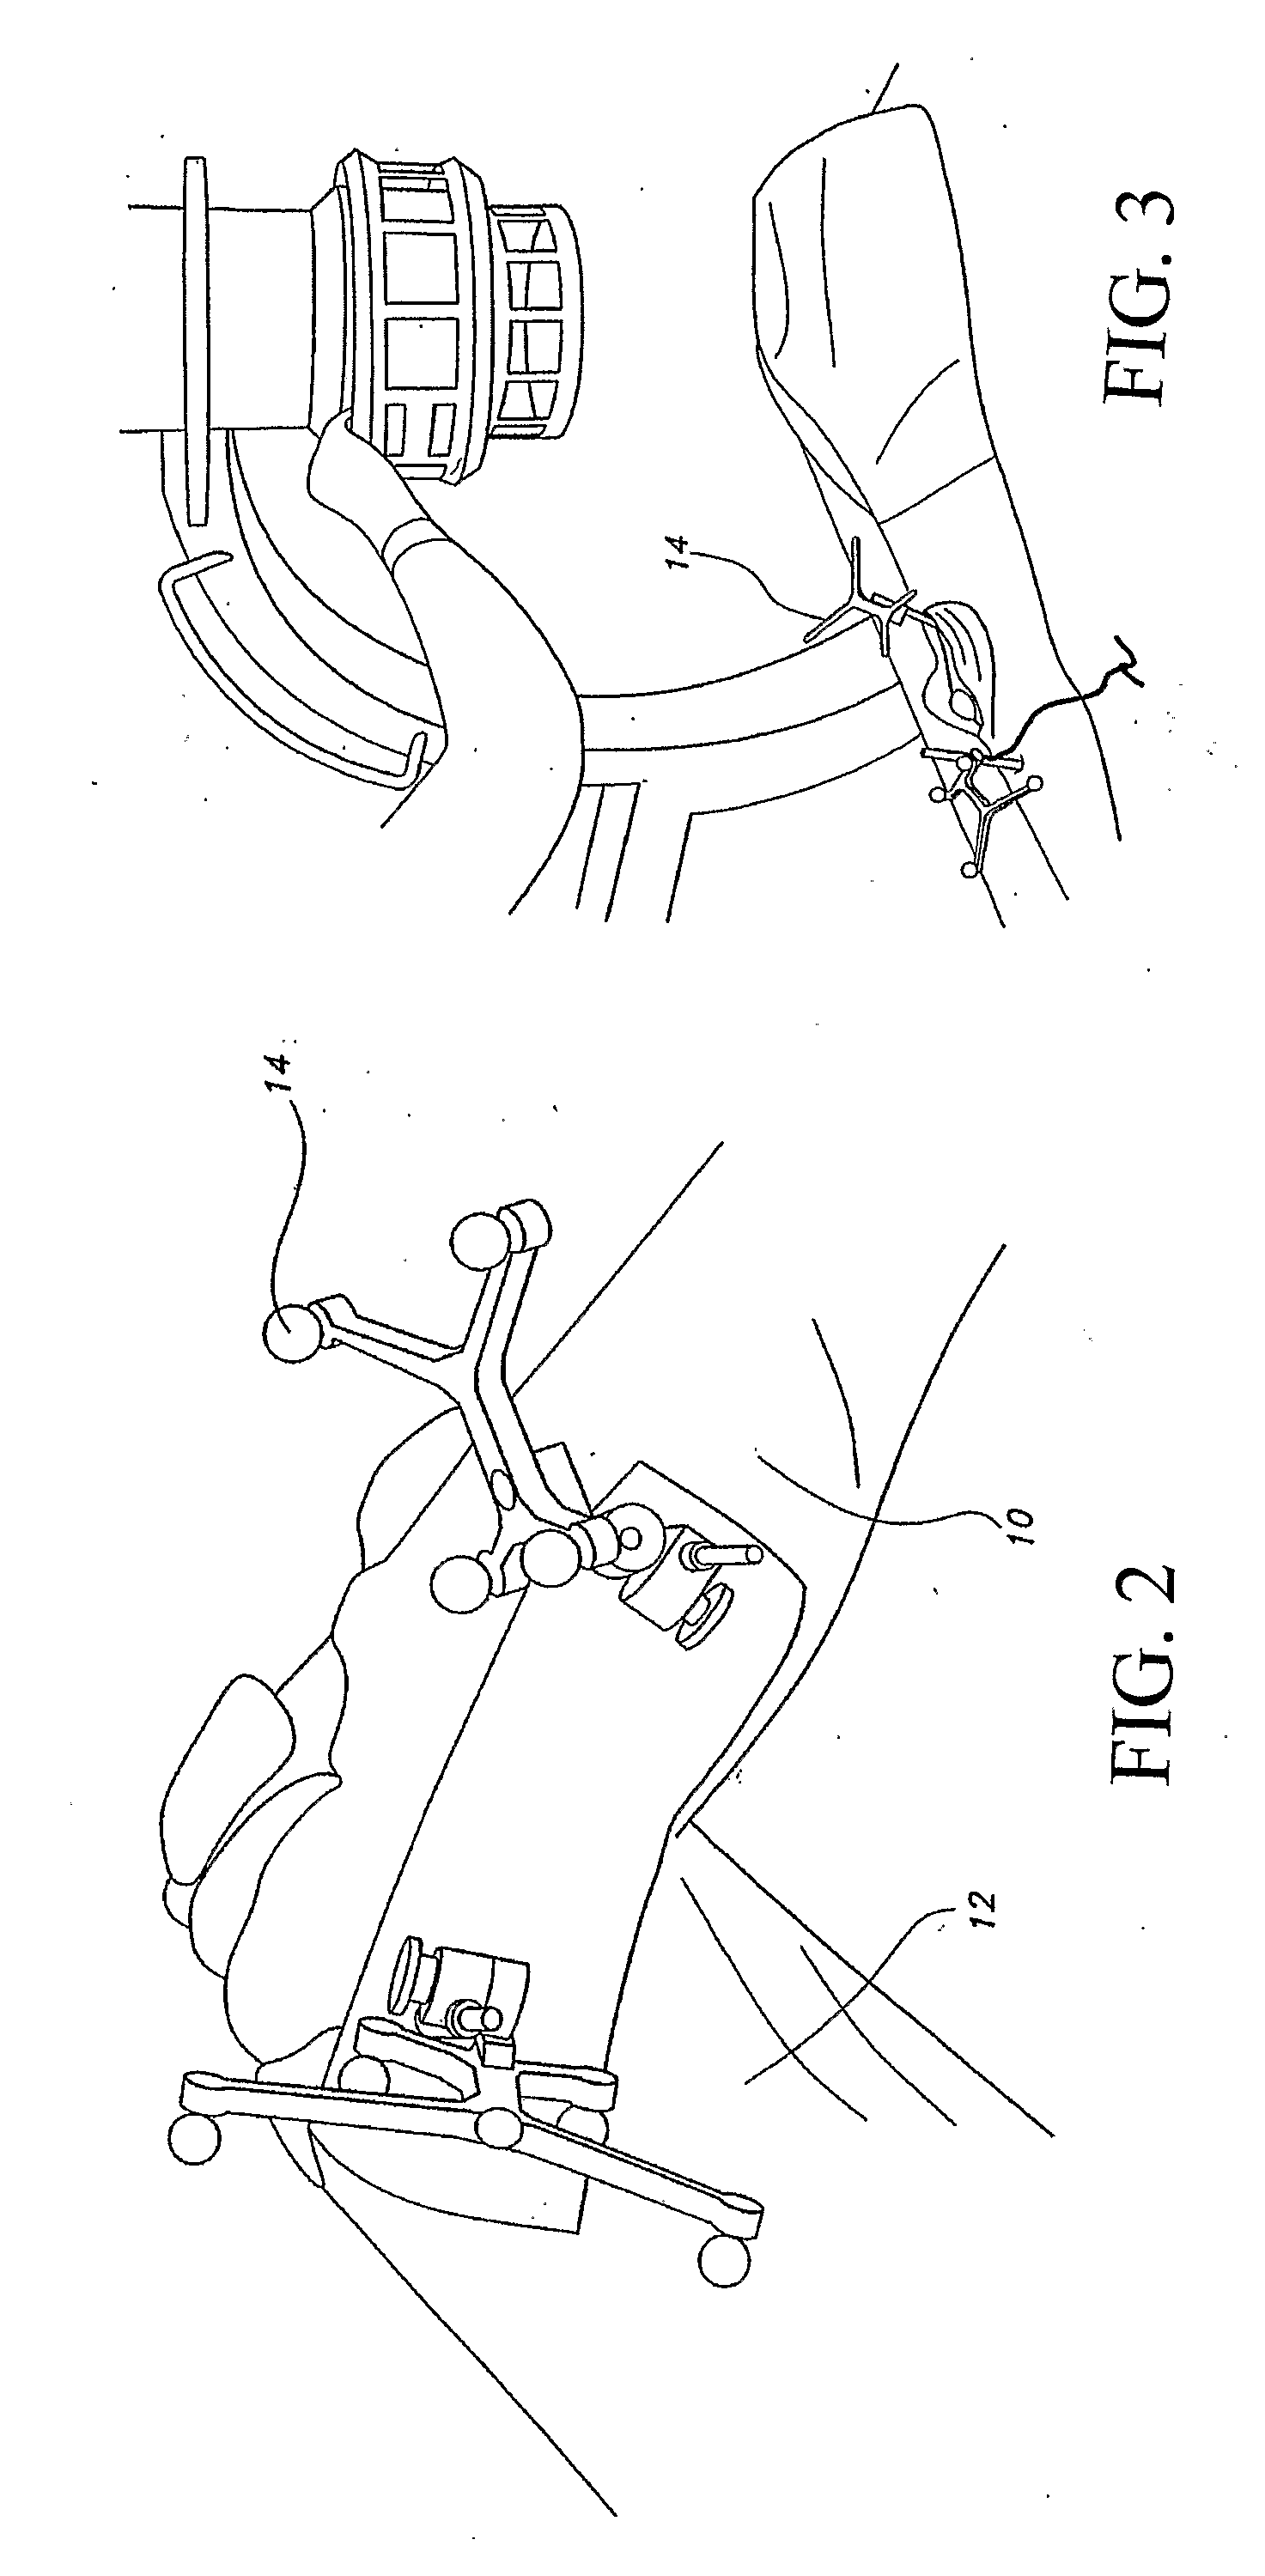 System and Method For Determining Tibial Rotation